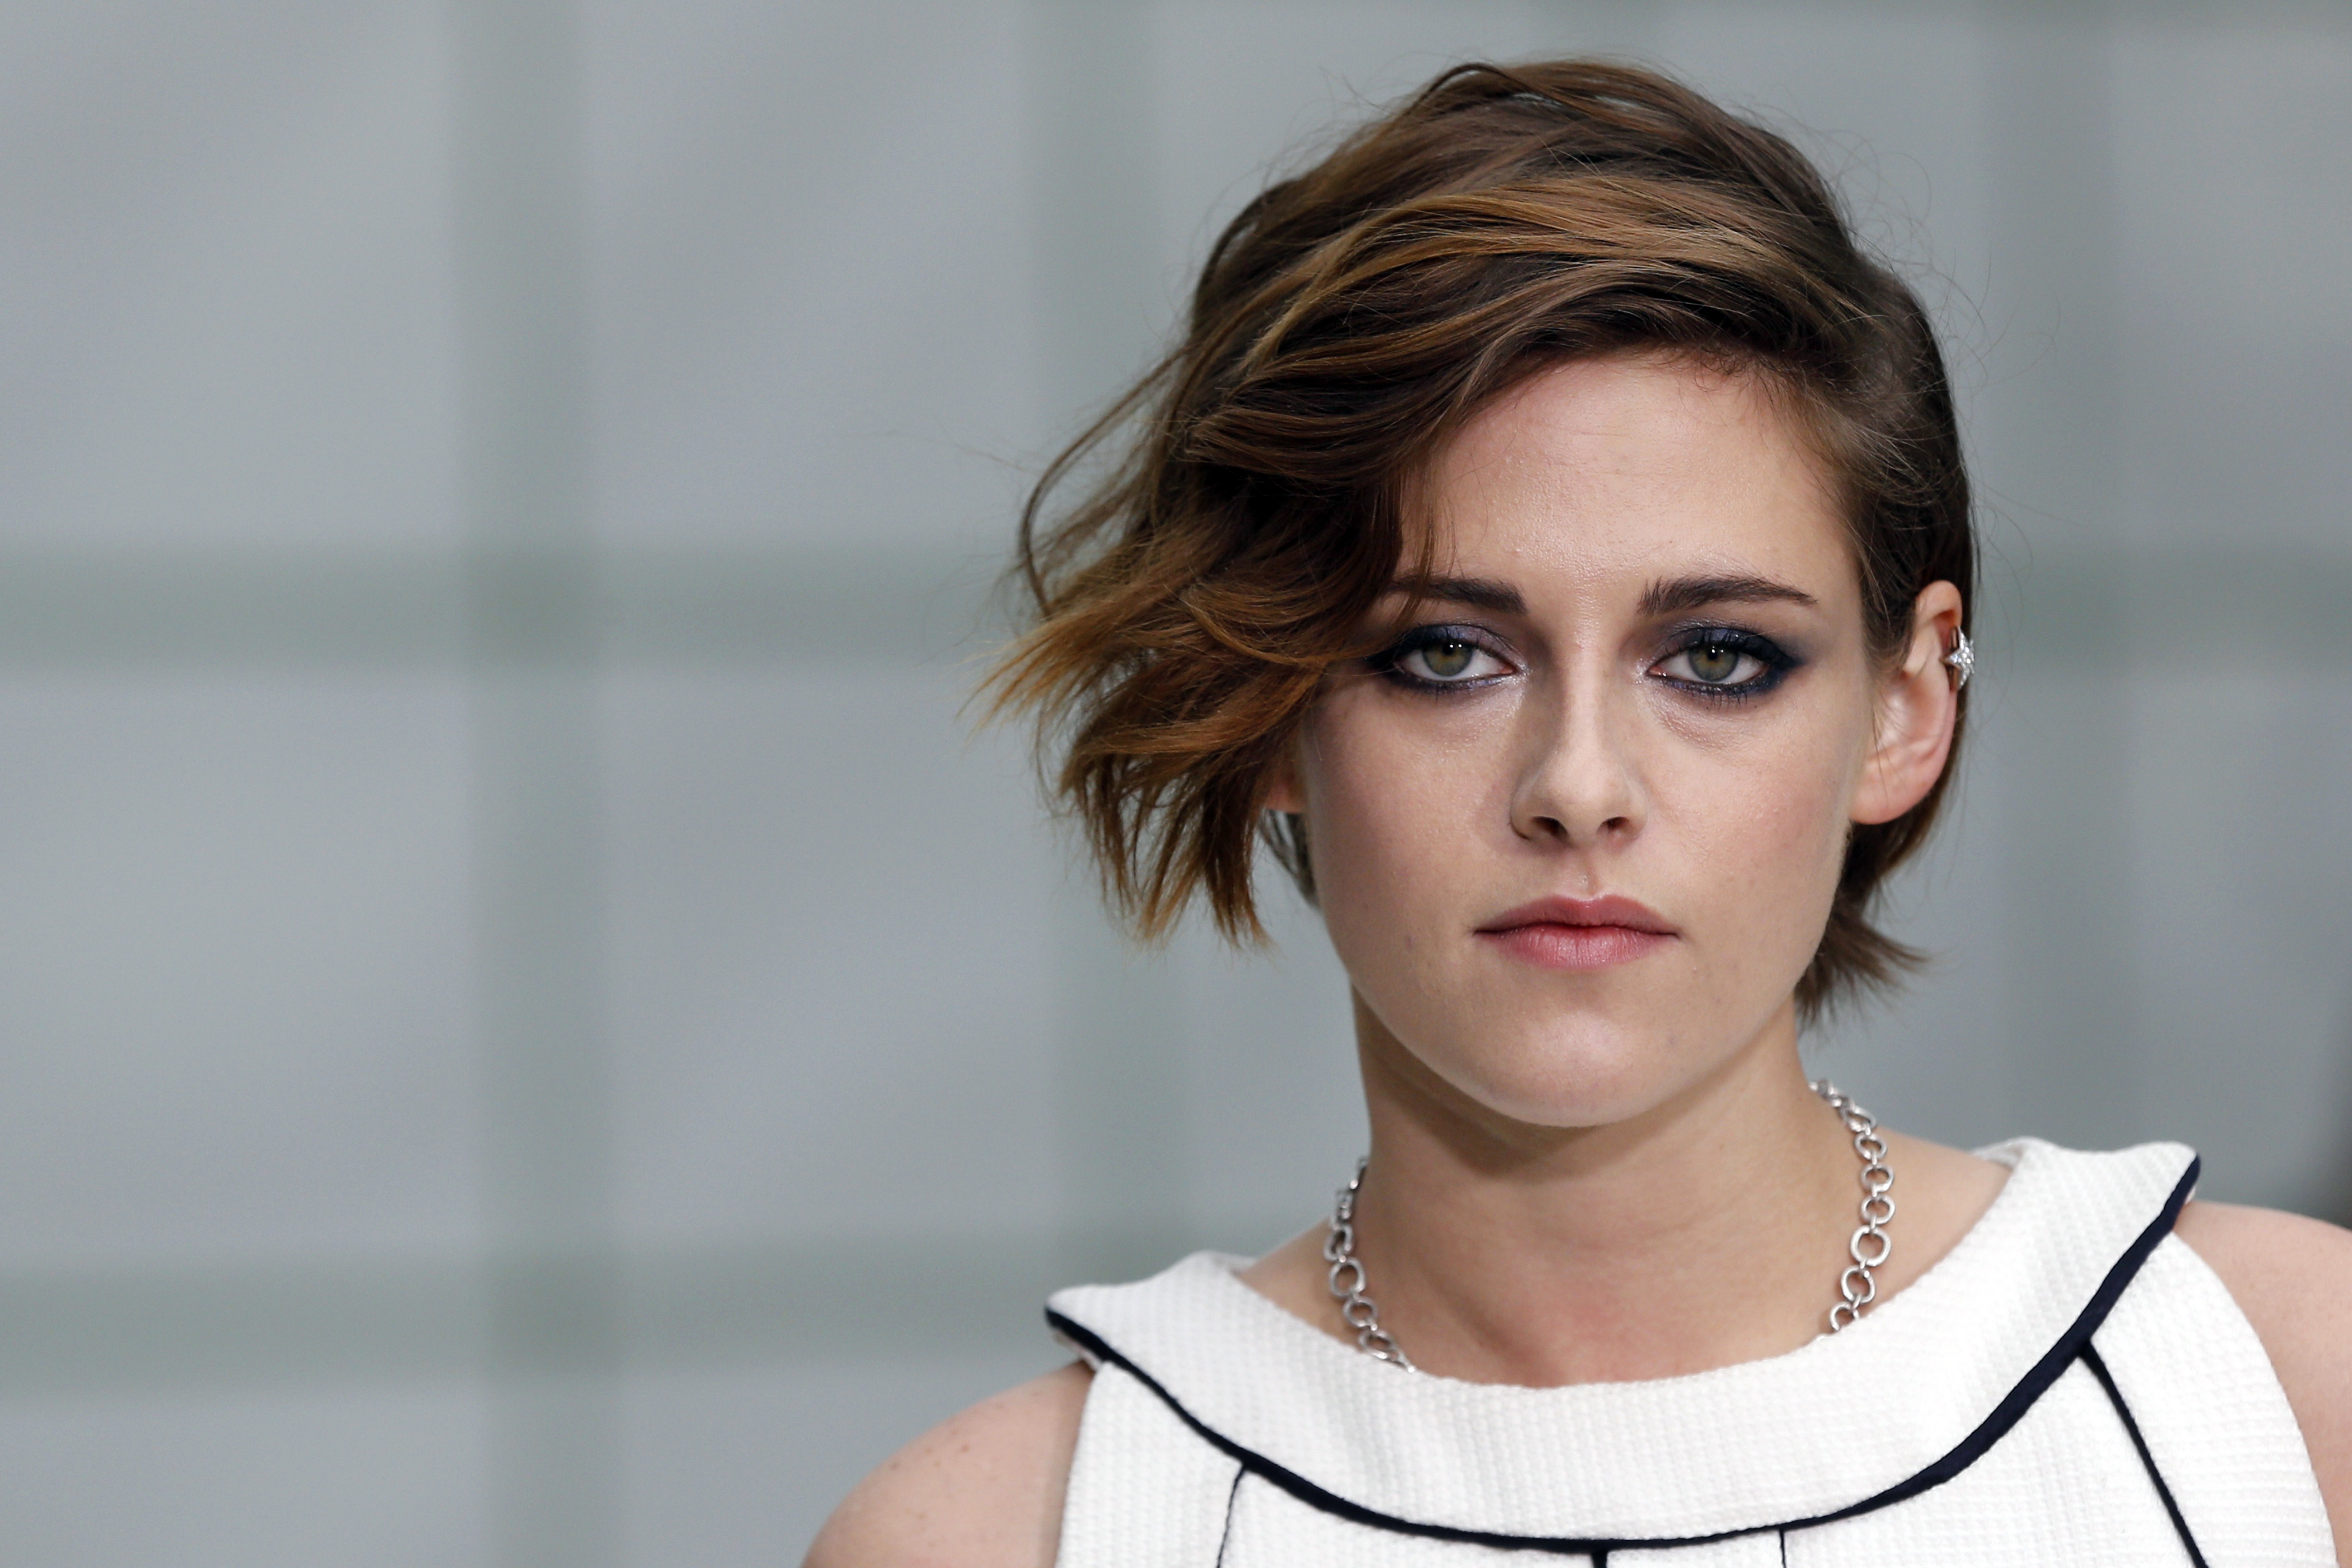 US actress Kristen Stewart poses prior to attend Chanel 2015 Haute Couture Spring-Summer collection fashion show on January 27, 2015 at the Grand Palais in Paris. AFP PHOTO / FRANCOIS GUILLOT (Photo credit should read FRANCOIS GUILLOT/AFP/Getty Images)